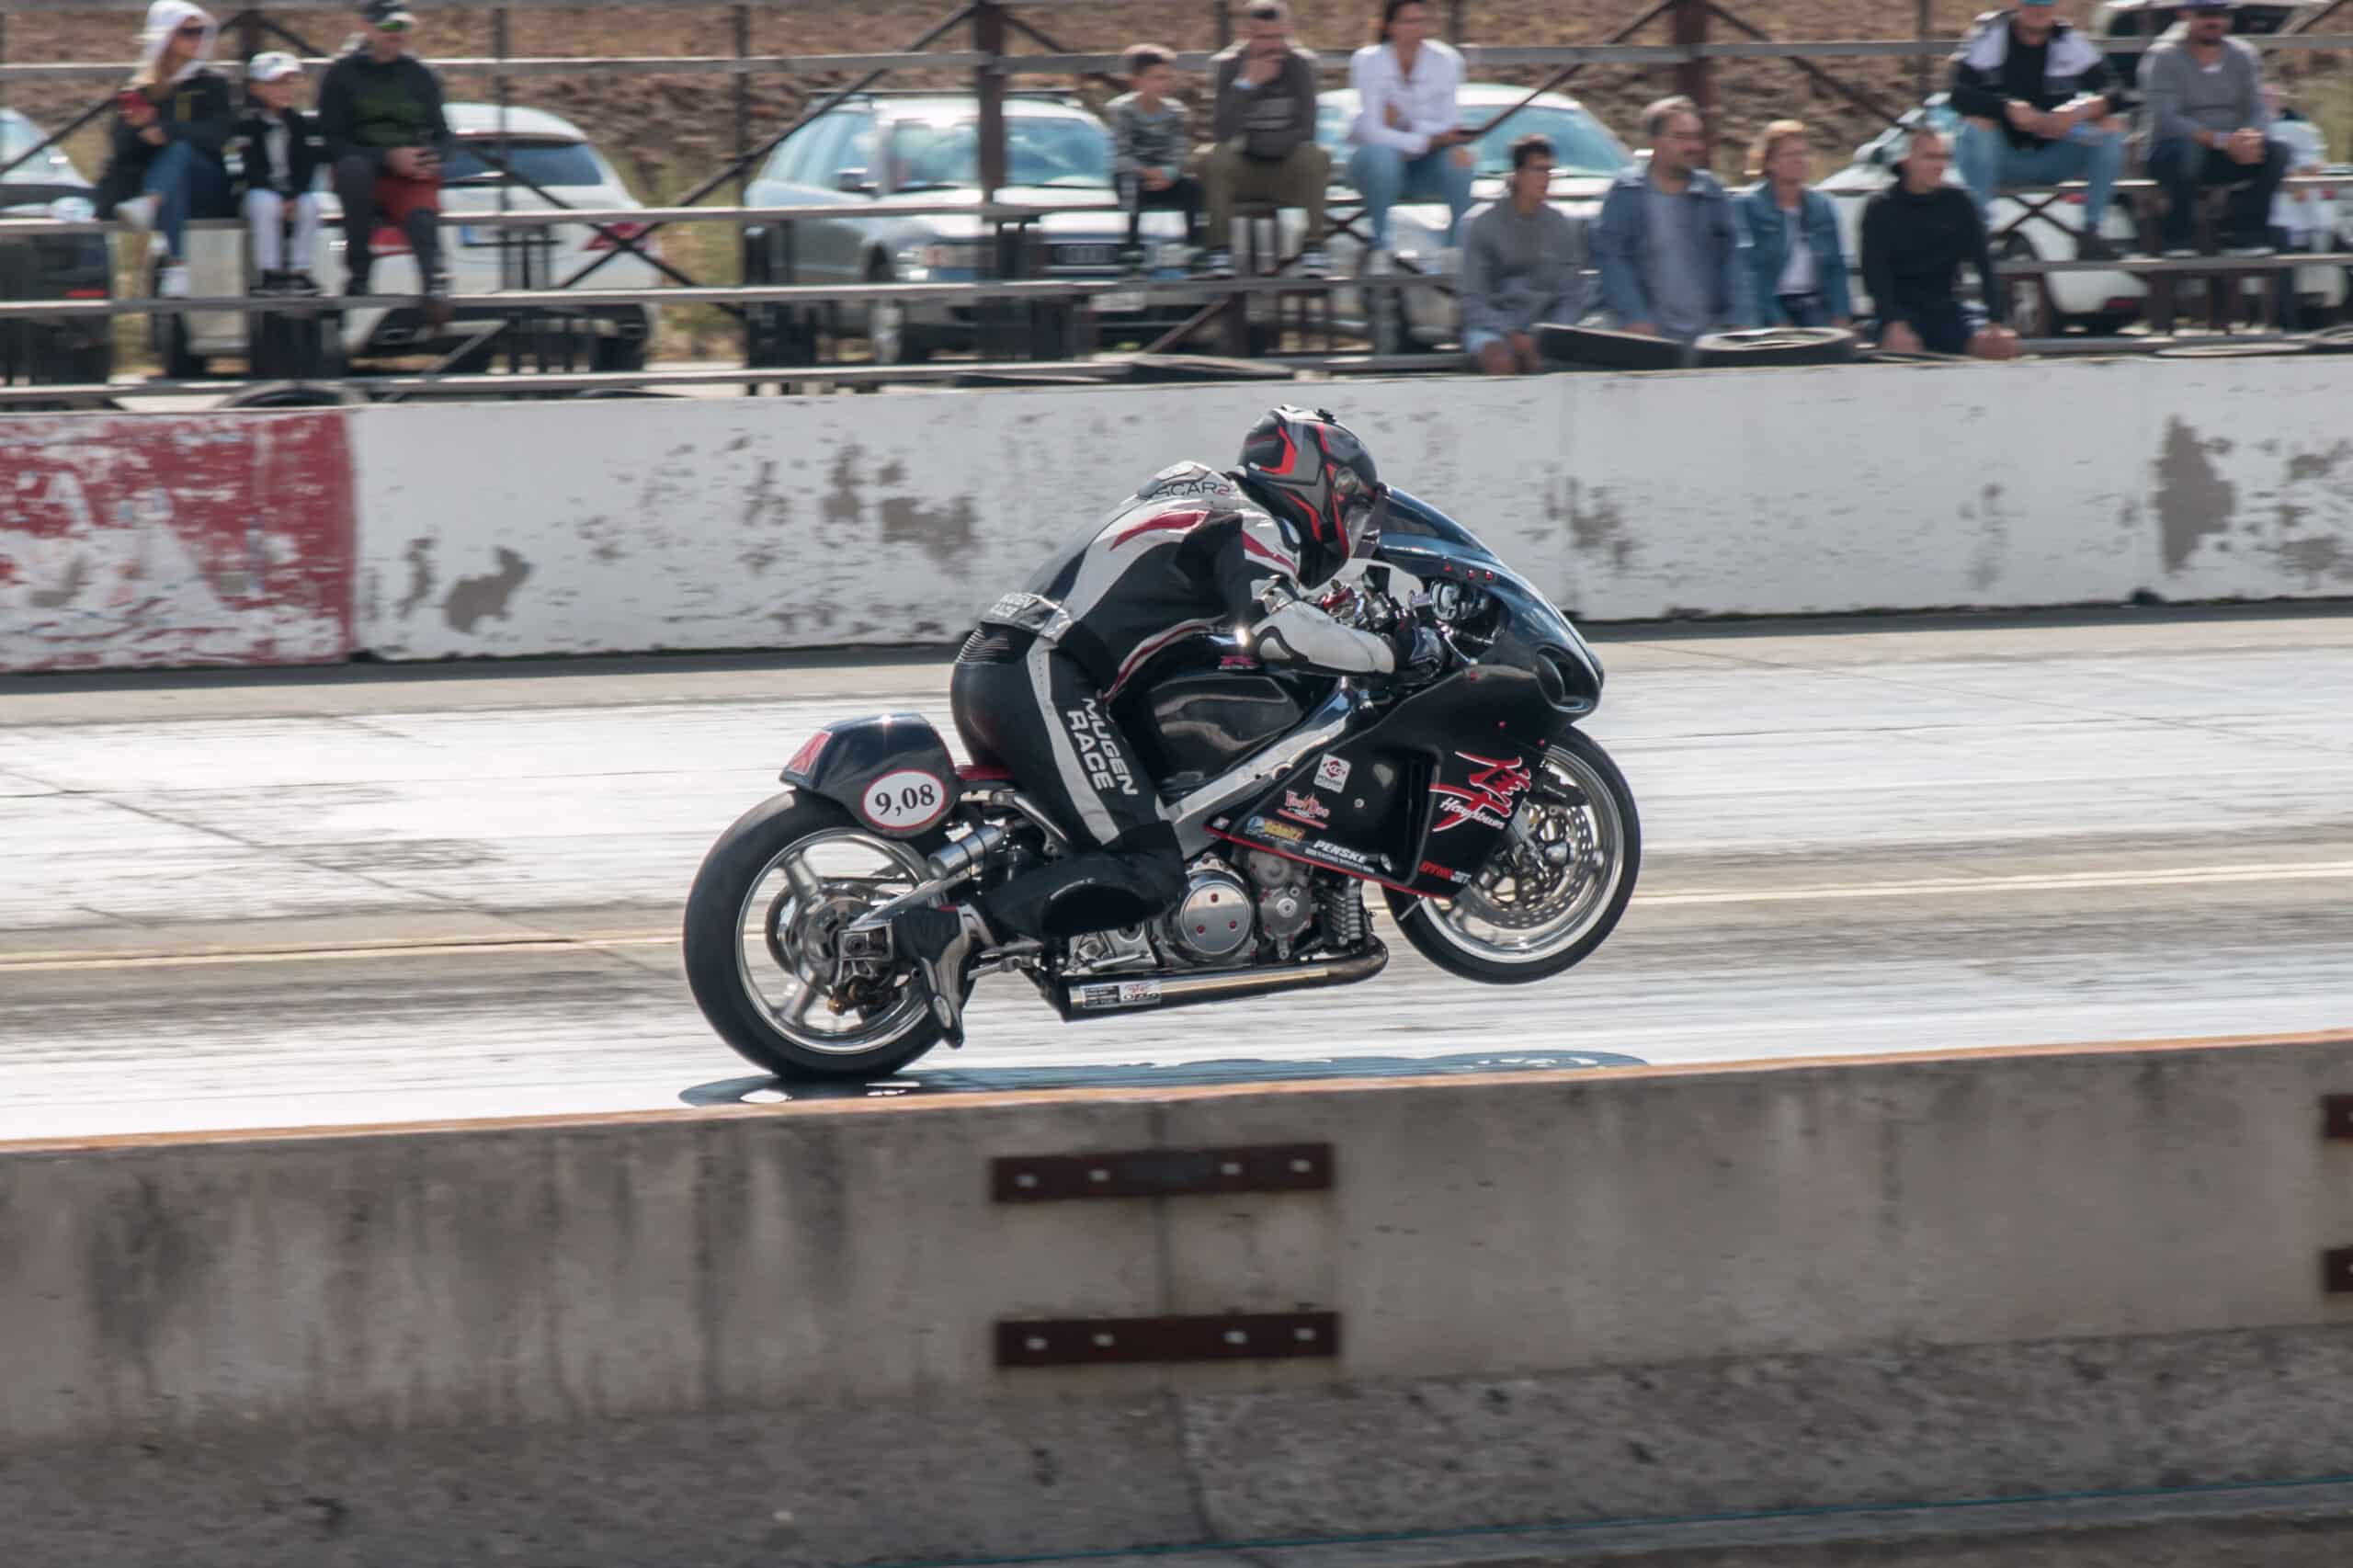 Join the Law Tigers at the 2023 Western Pro Extreme Championships Nov 3-5 at the iconic Sacramento Raceway.